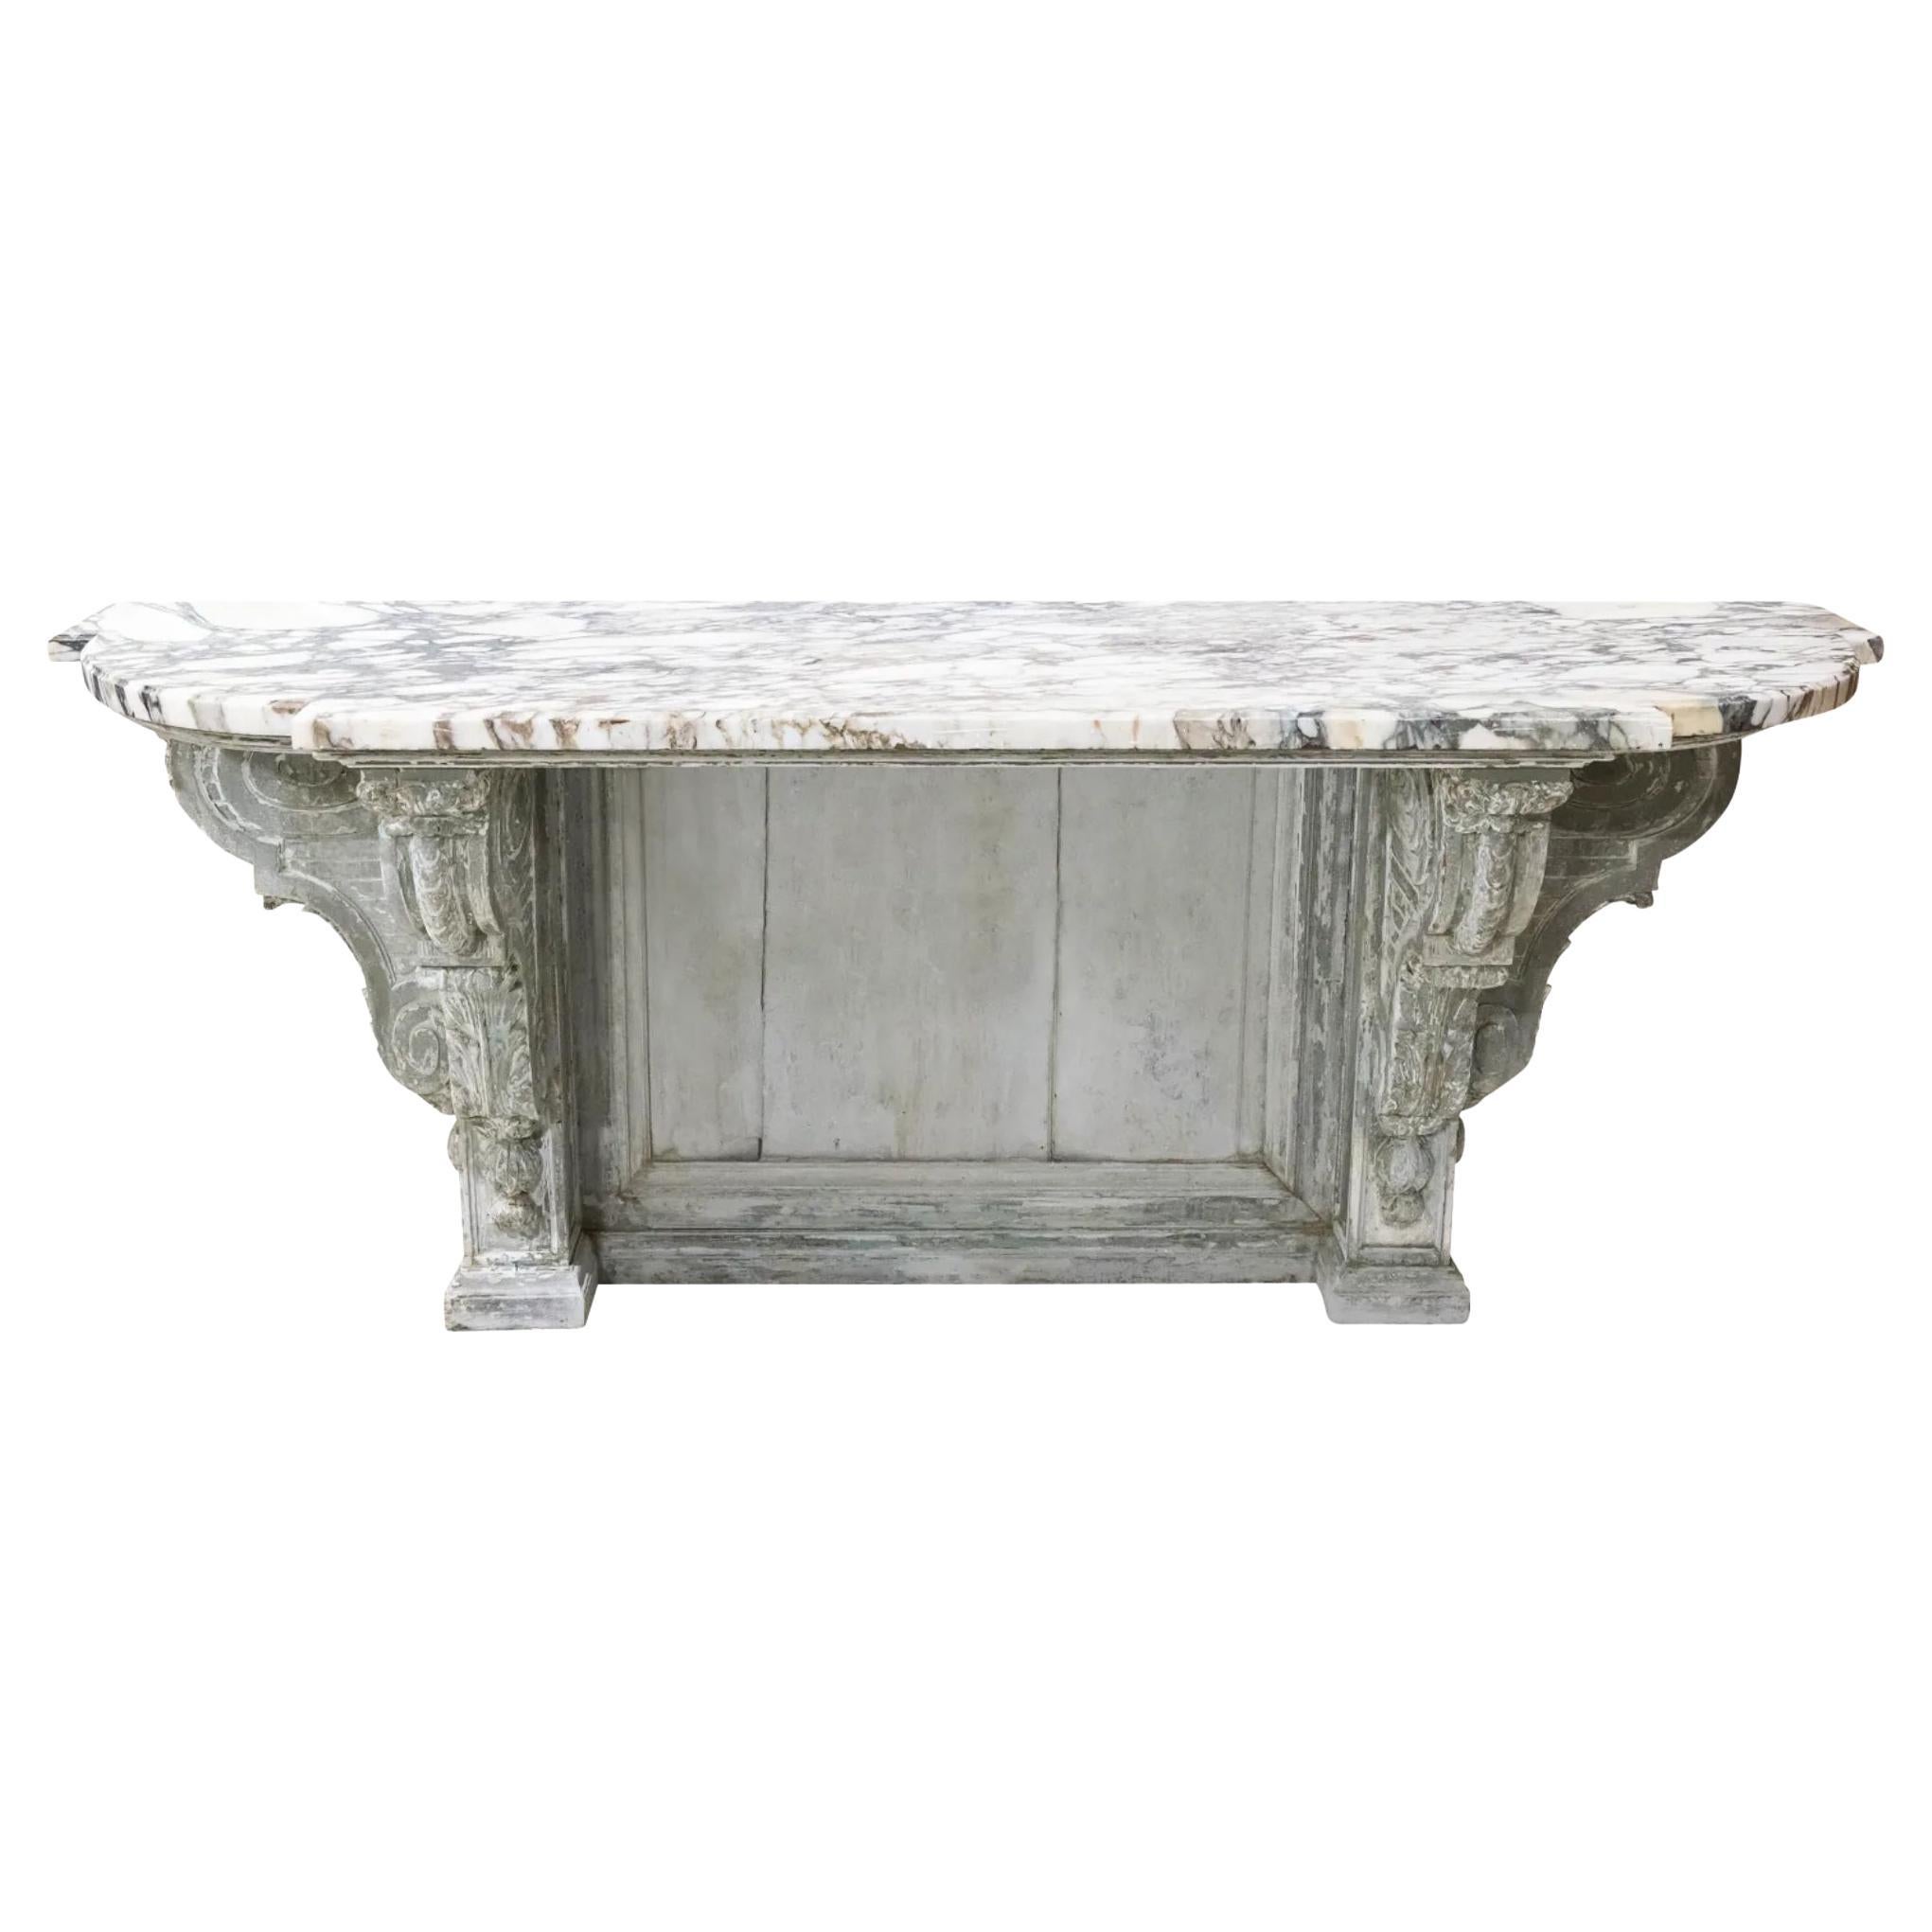 Fine 19th Century French Regence Style Painted Console with Calacatta Marble Top For Sale